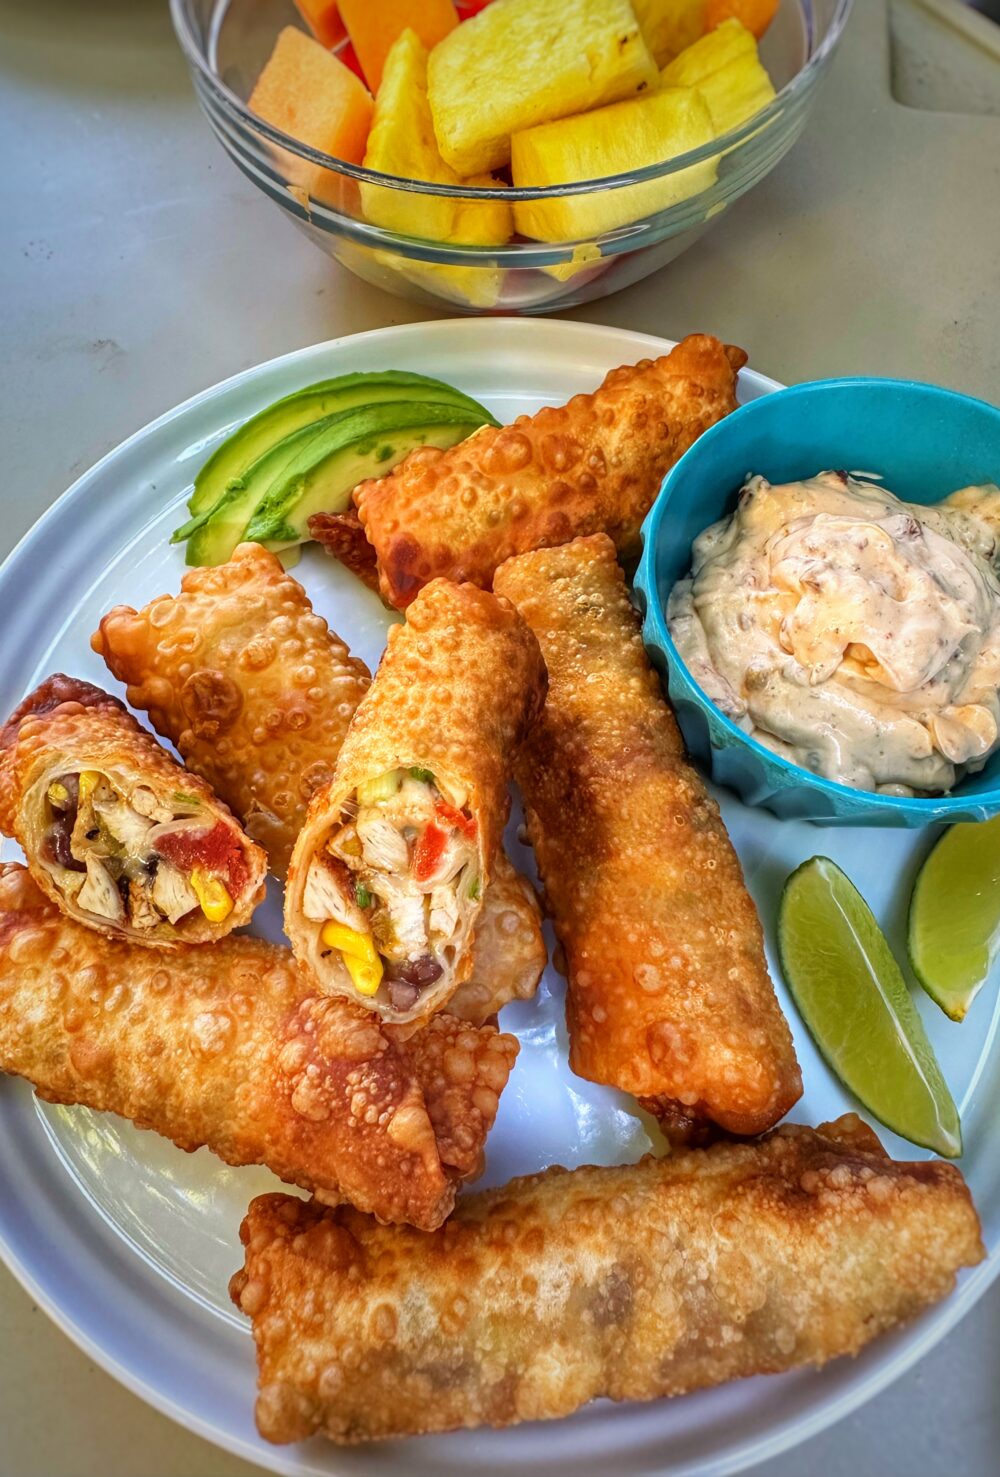 A plate of finished southwest egg rolls on a plate with garnish.